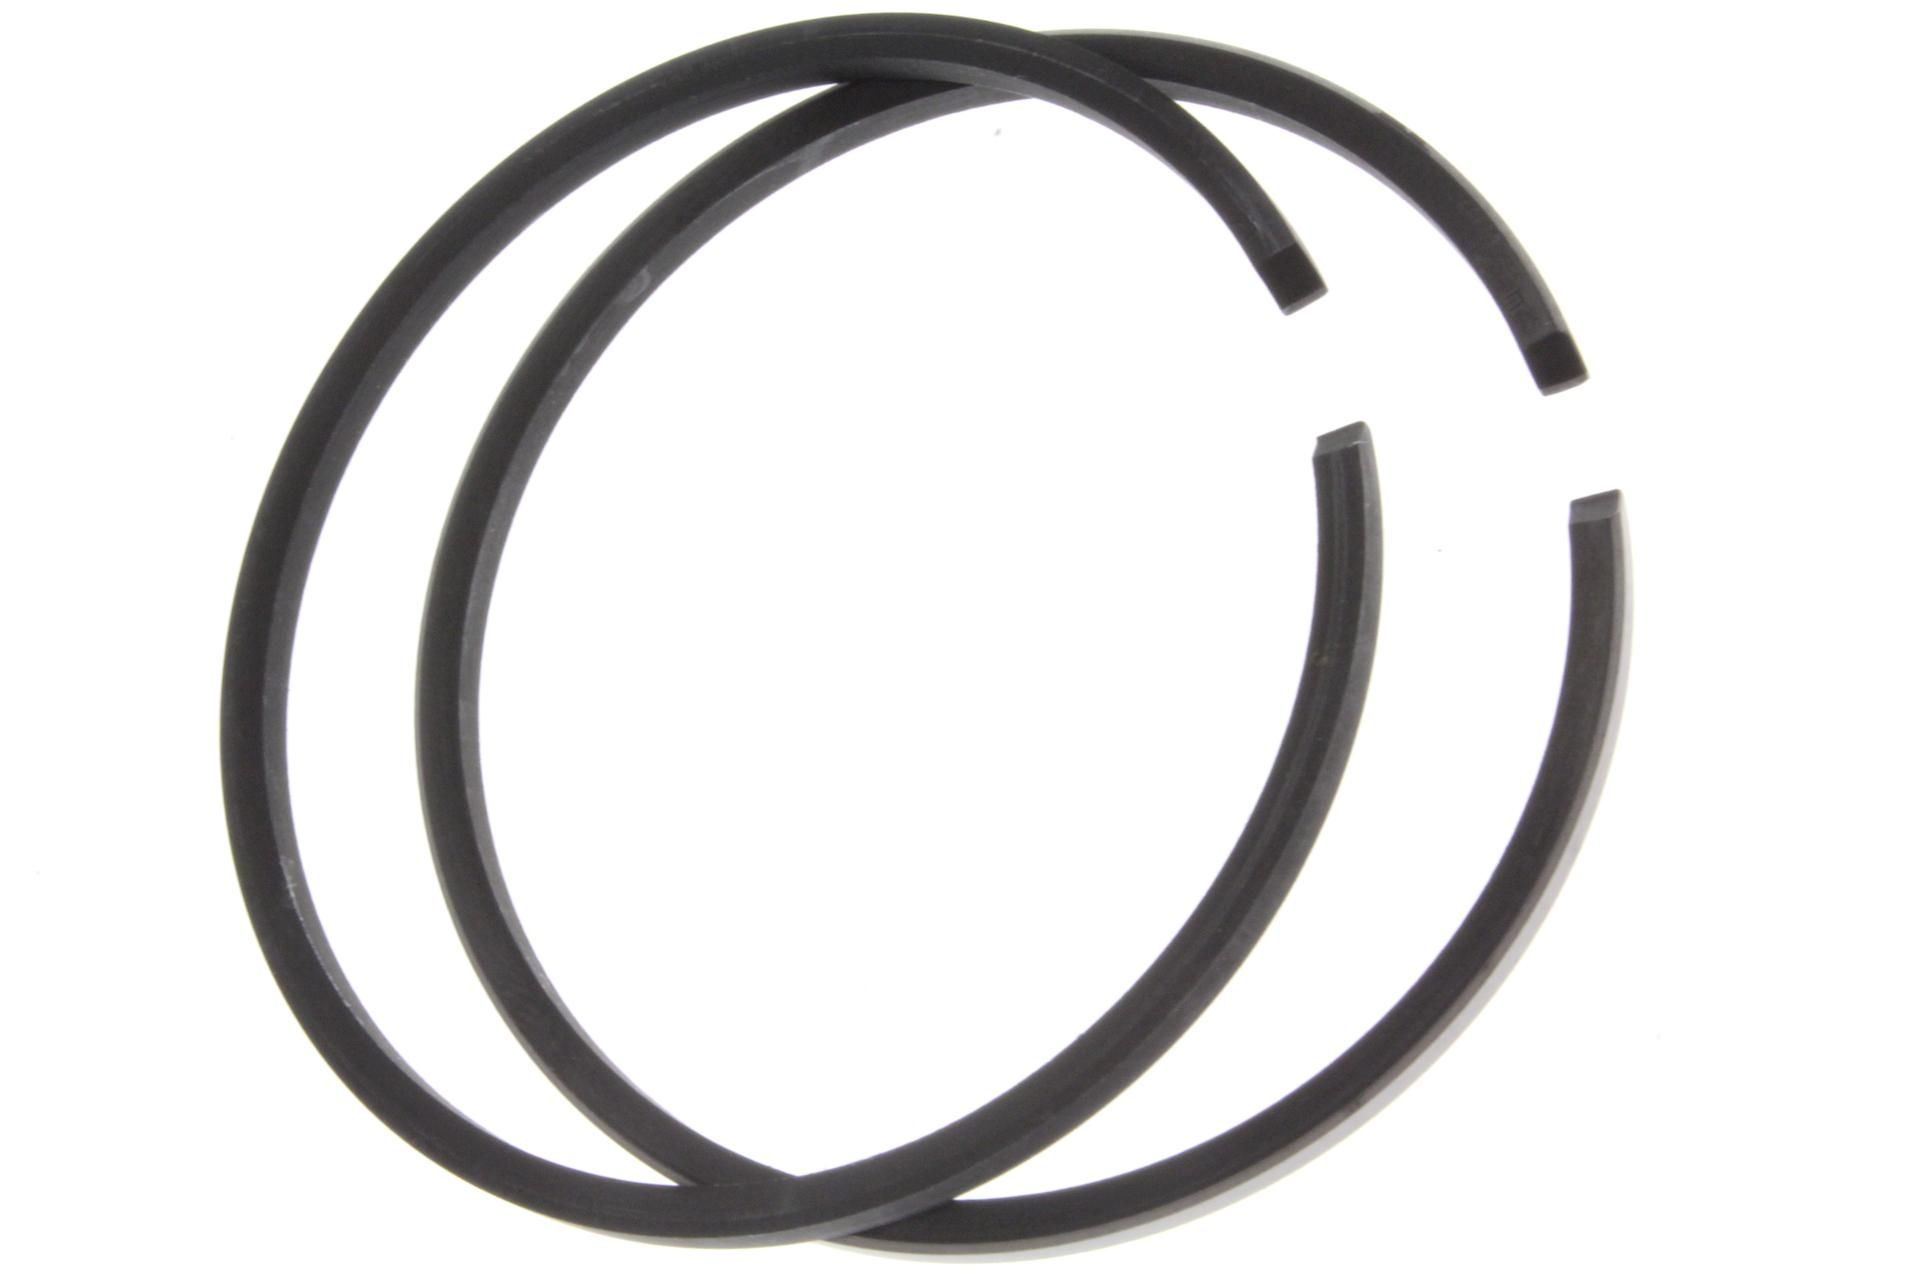 3E5-11610-00-00 Superseded by 14N-11603-00-00 - PISTON RING SET (S